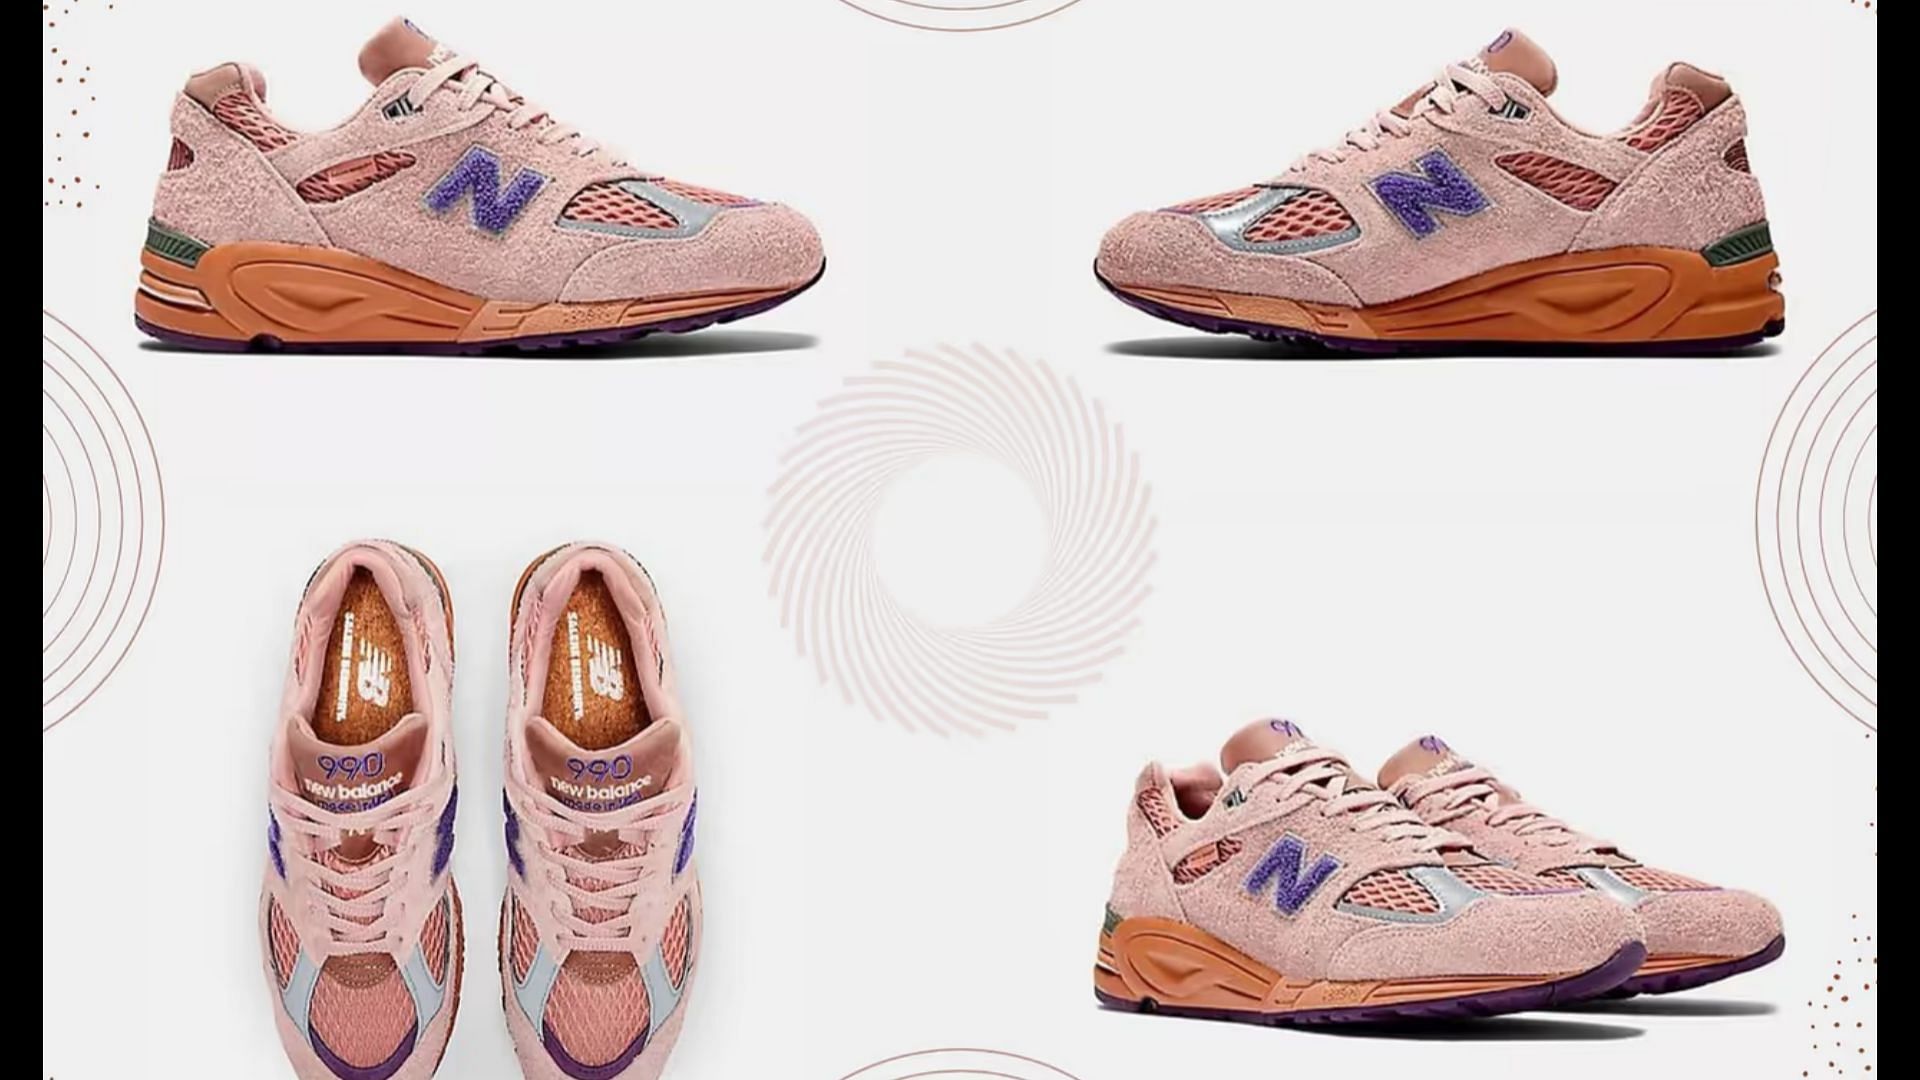 The re-releasing Salehe Bembury x New Balance 990v2 &quot;Sand Be the Time&quot; sneakers are inspired by the sand dunes of Southern Utah (Image via Sportskeeda)